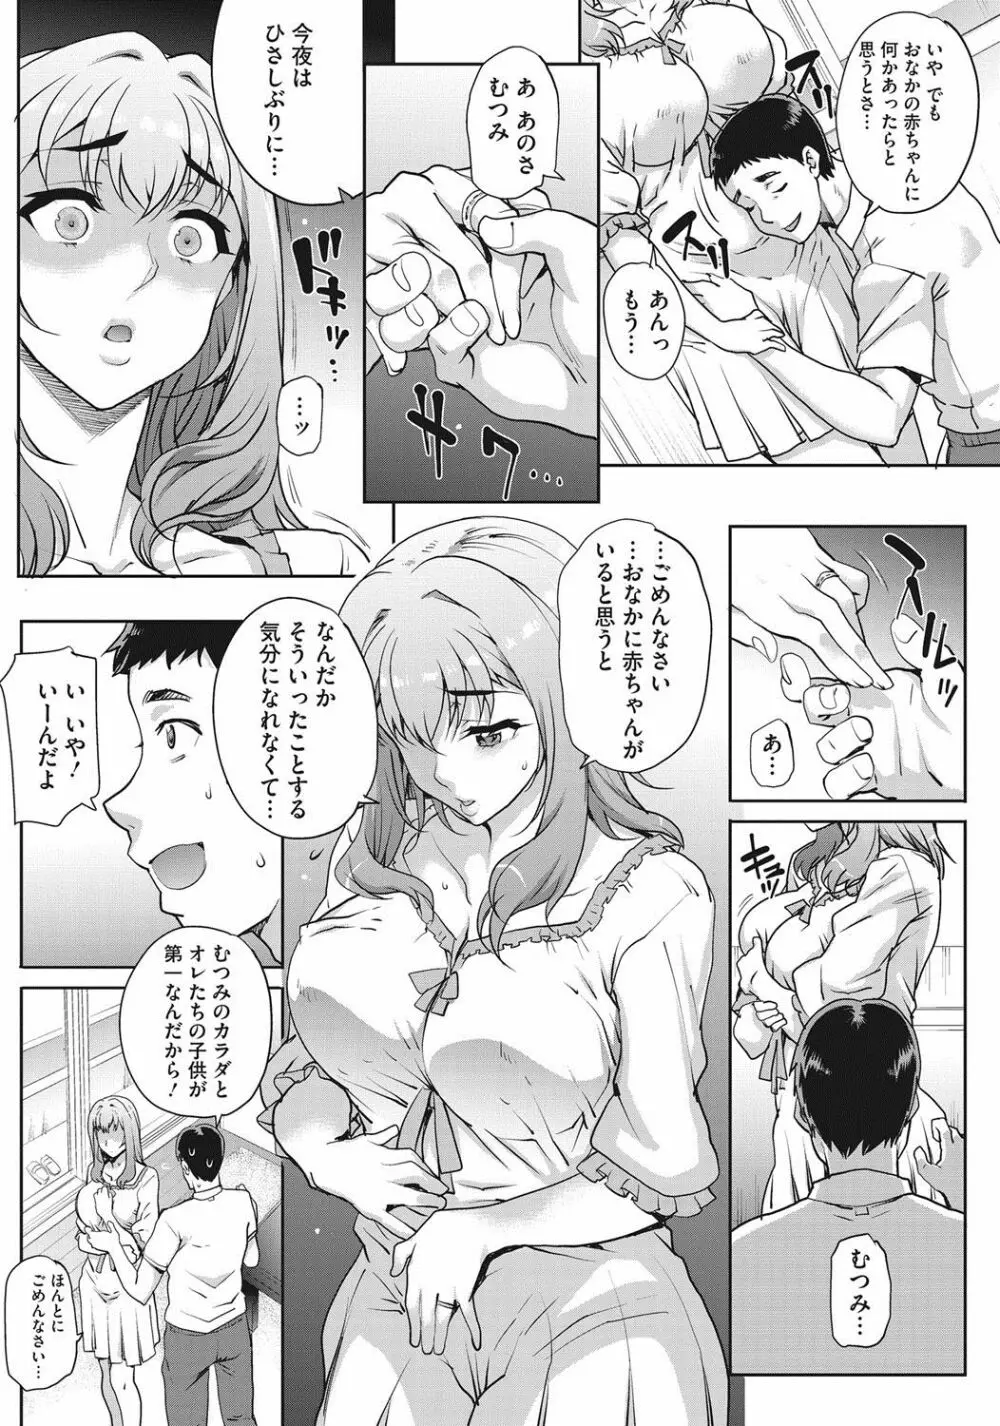 [Carn] Tanshinfunin ~Sisters~ Ch 1-7 82ページ